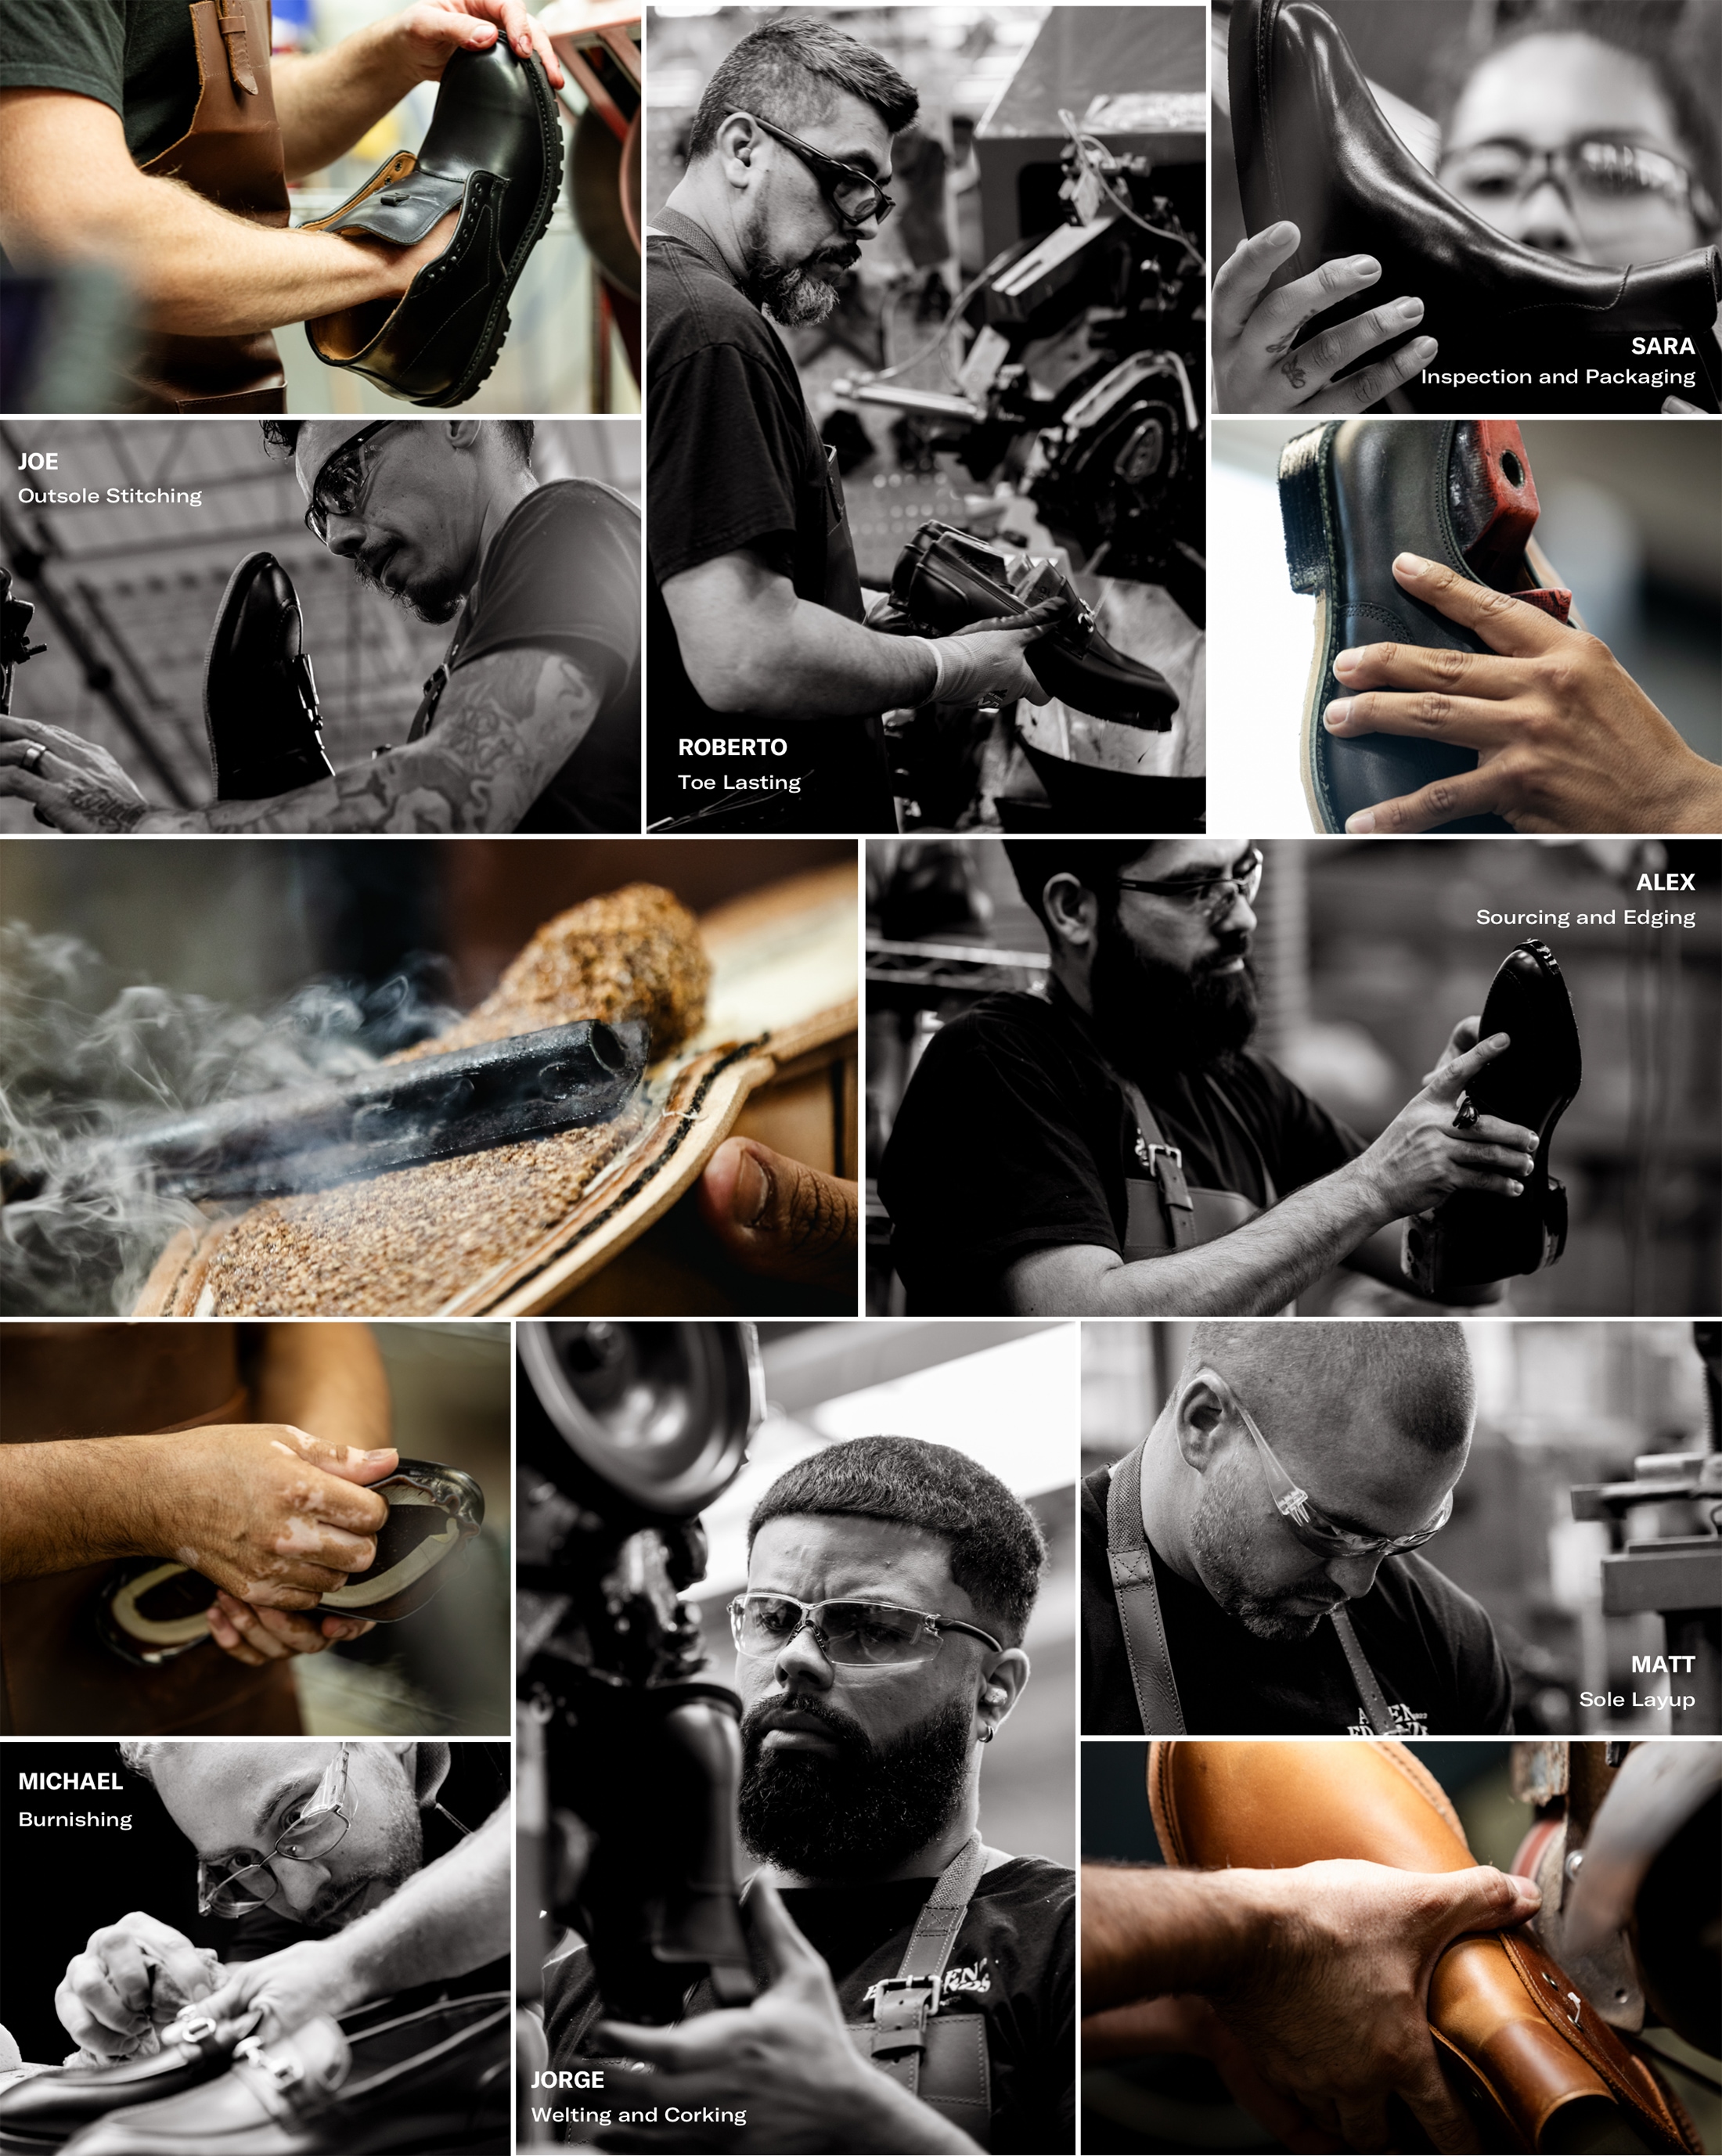 A series of photos showing the many of the artisans of Allen Edmonds